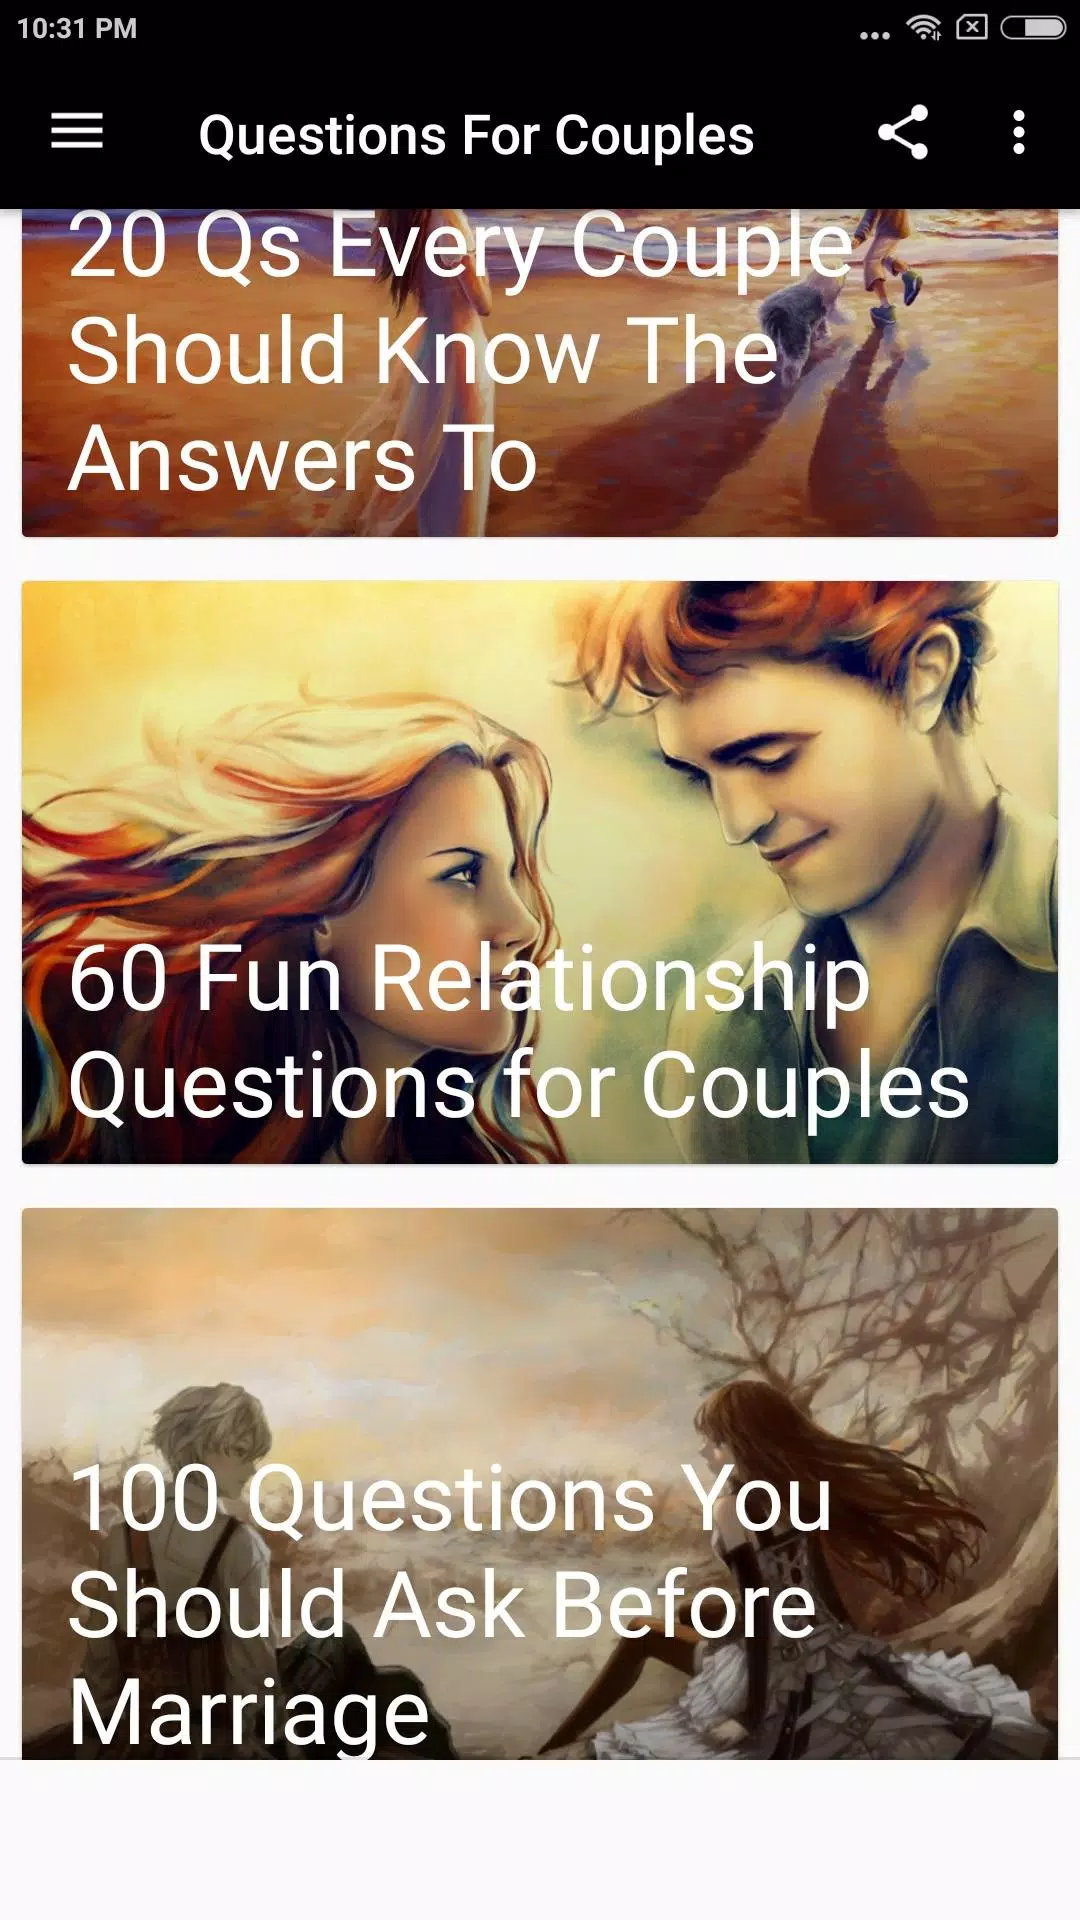 Questions 100 pre marriage 151 Best